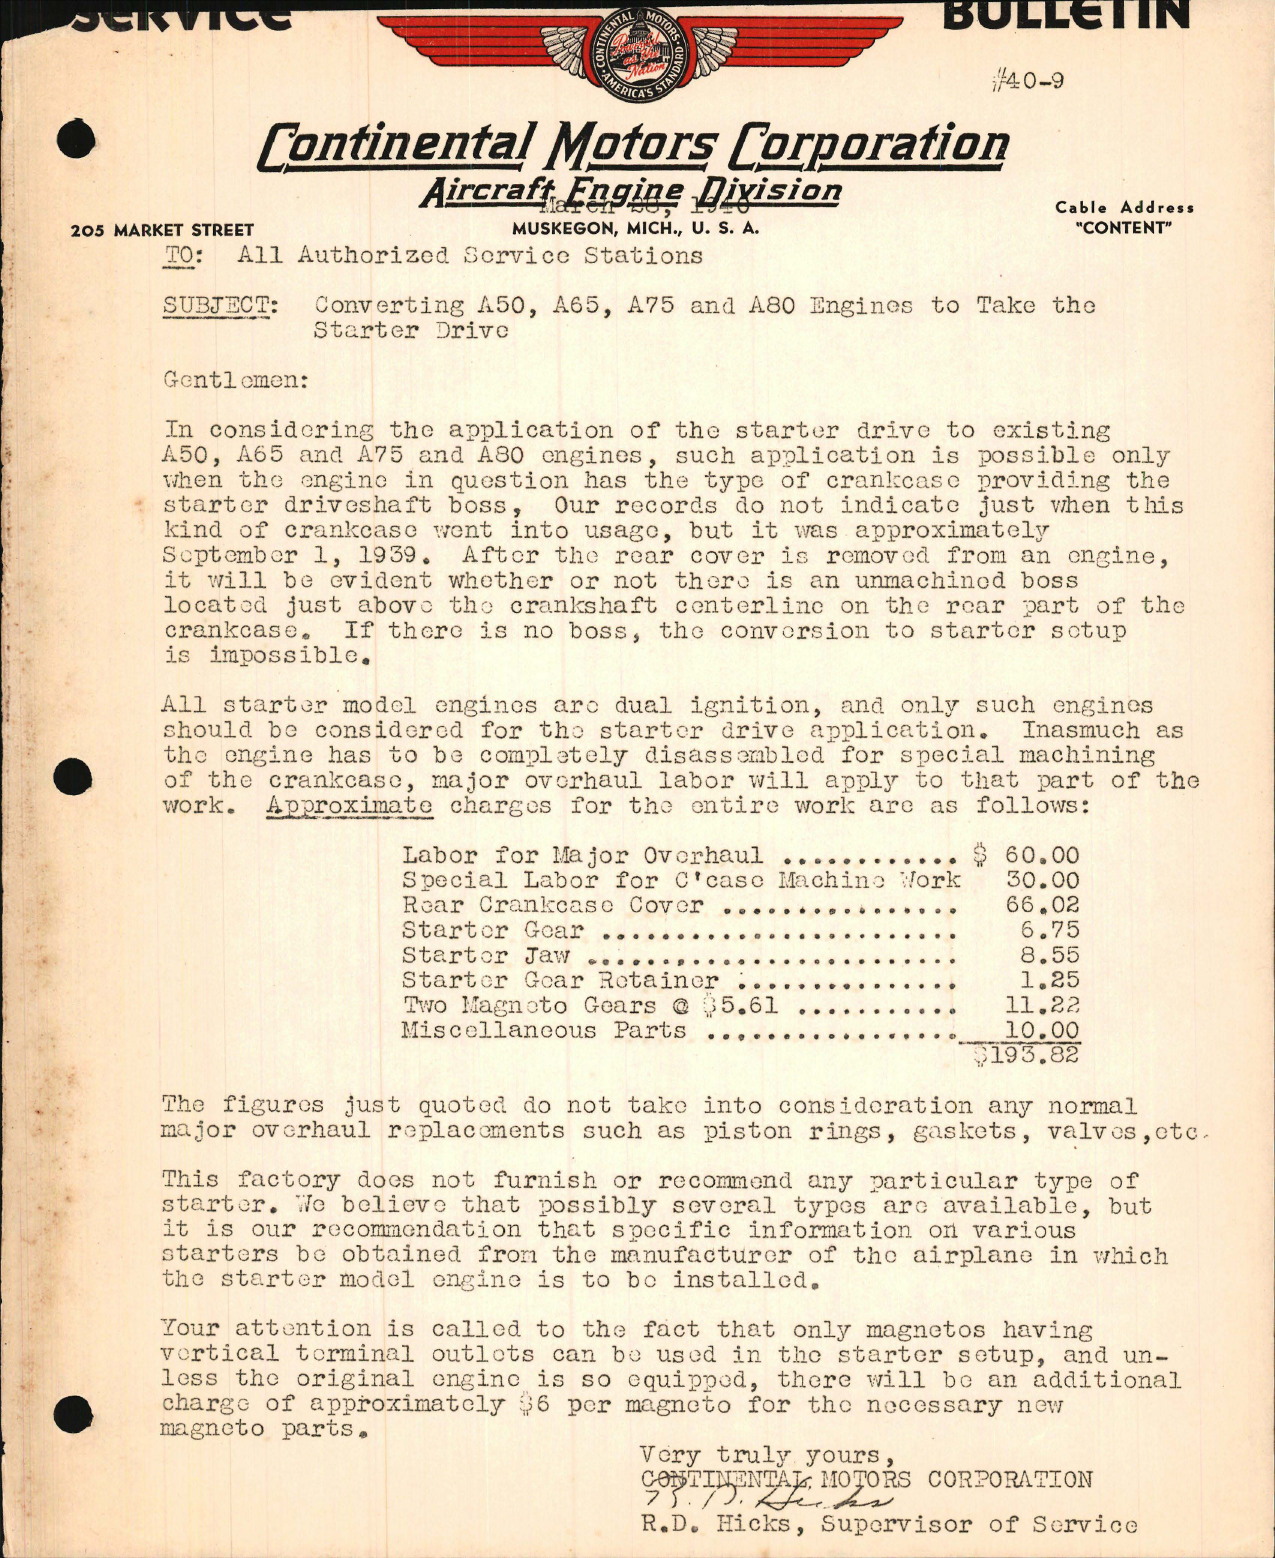 Sample page 1 from AirCorps Library document: Converting A50, A65, A75 and A80 Engines to Take the Starter Drive